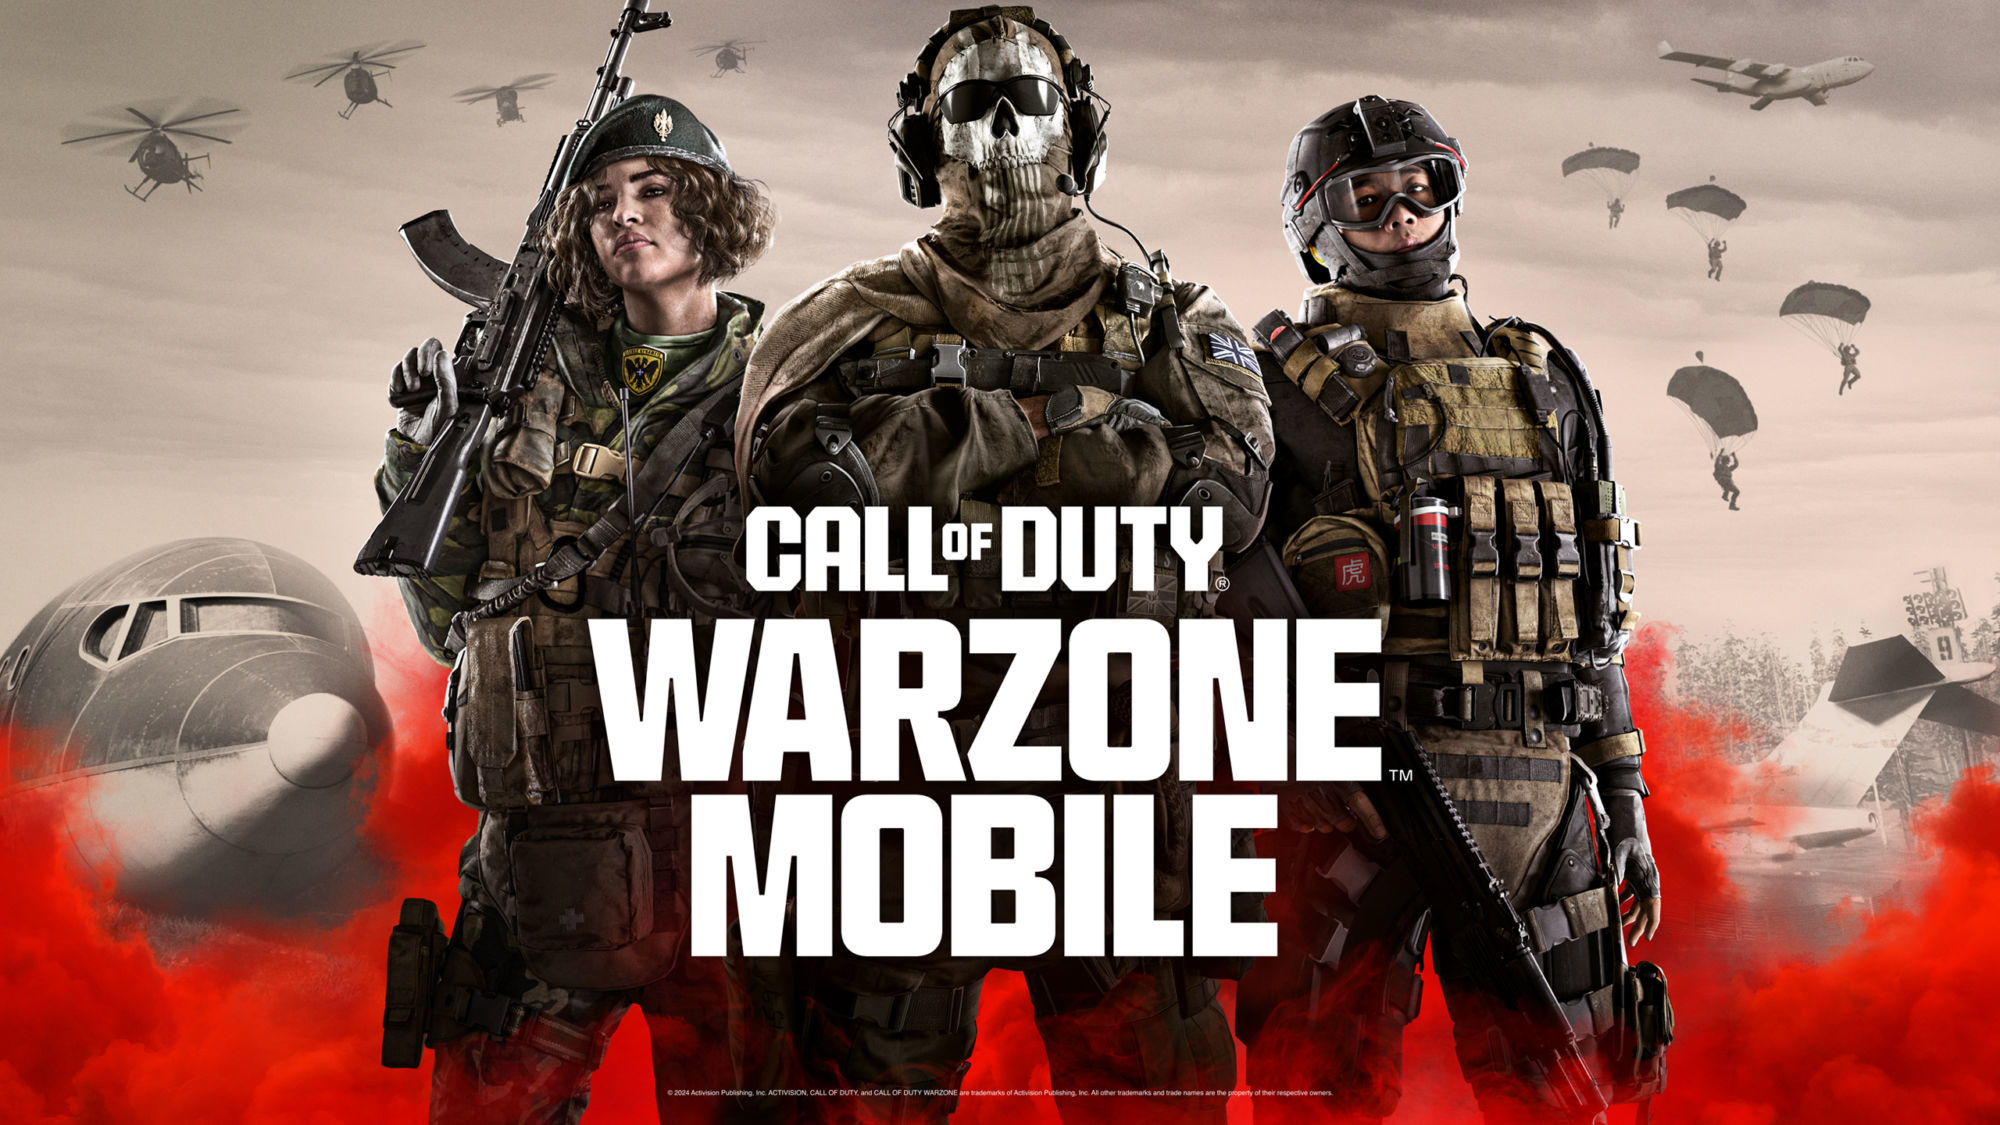 Call-Of-Duty-Warzone-Mobie-2000x11